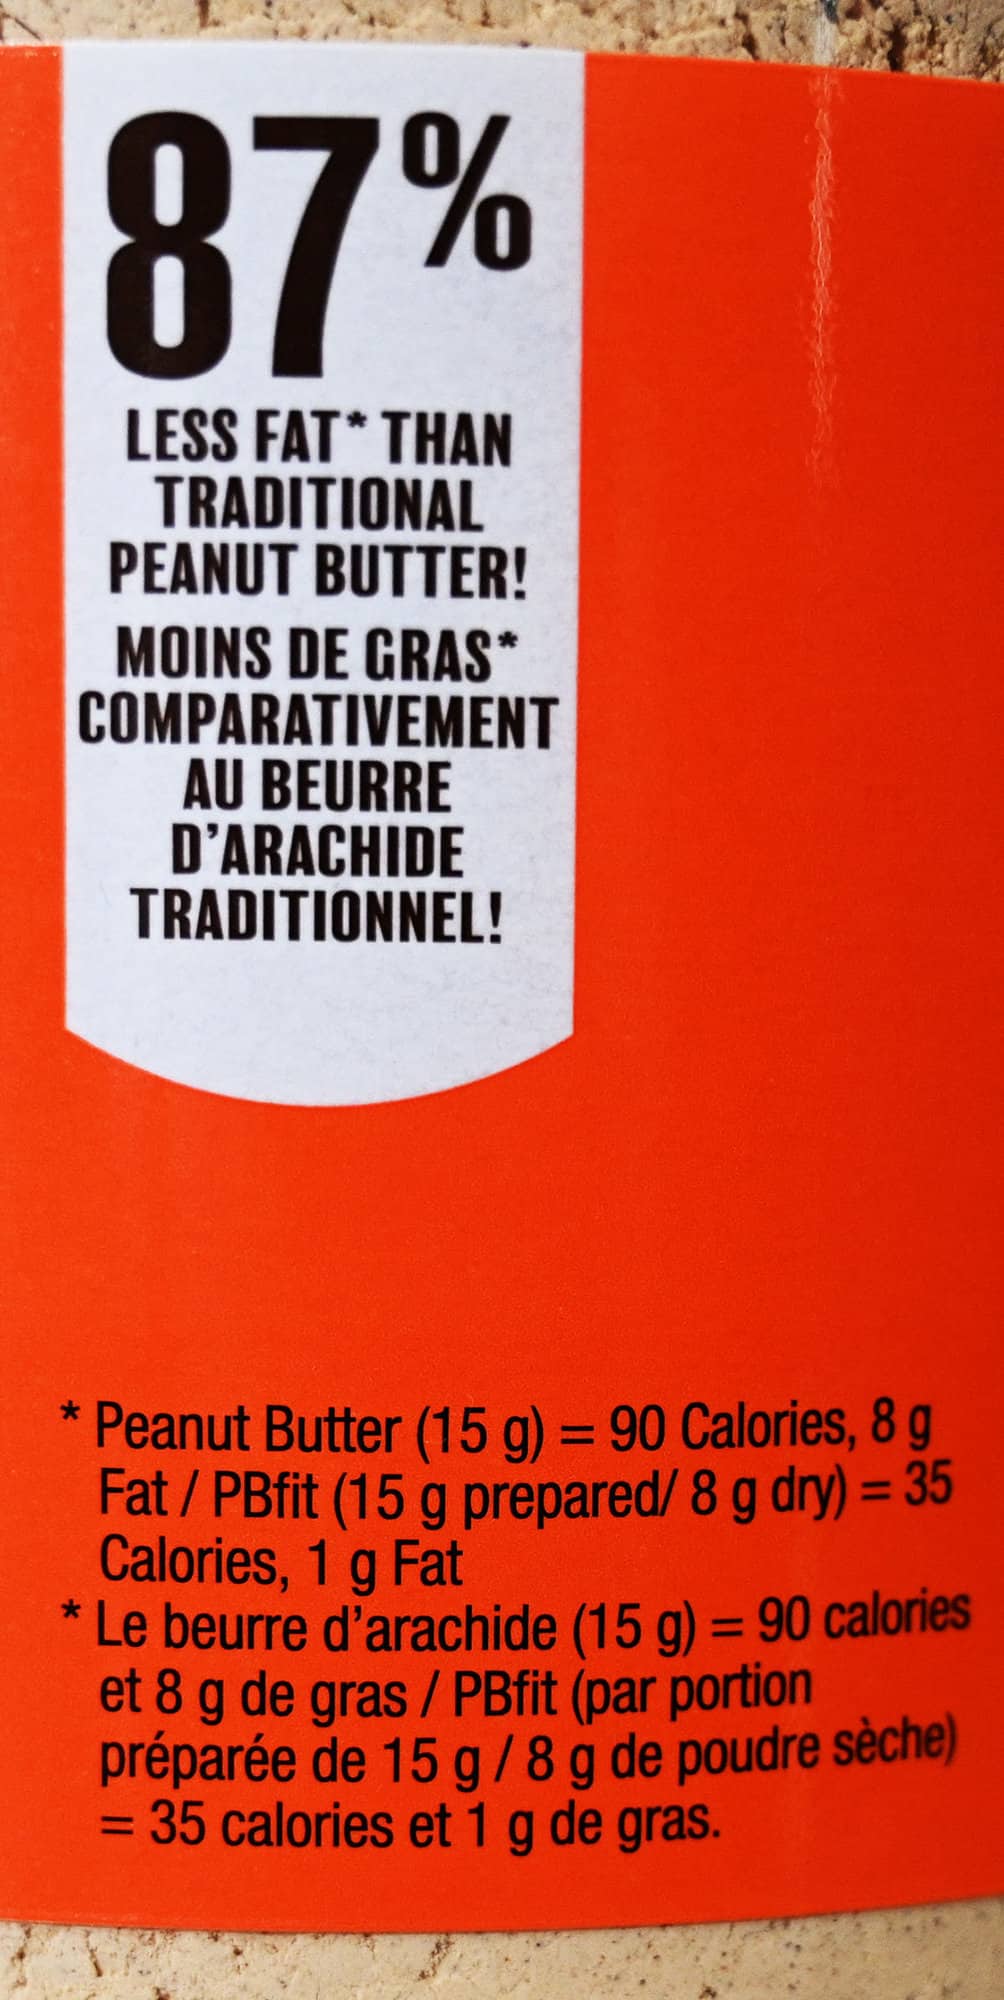 Image showing the container saying there is less fat than traditional peanut butter.